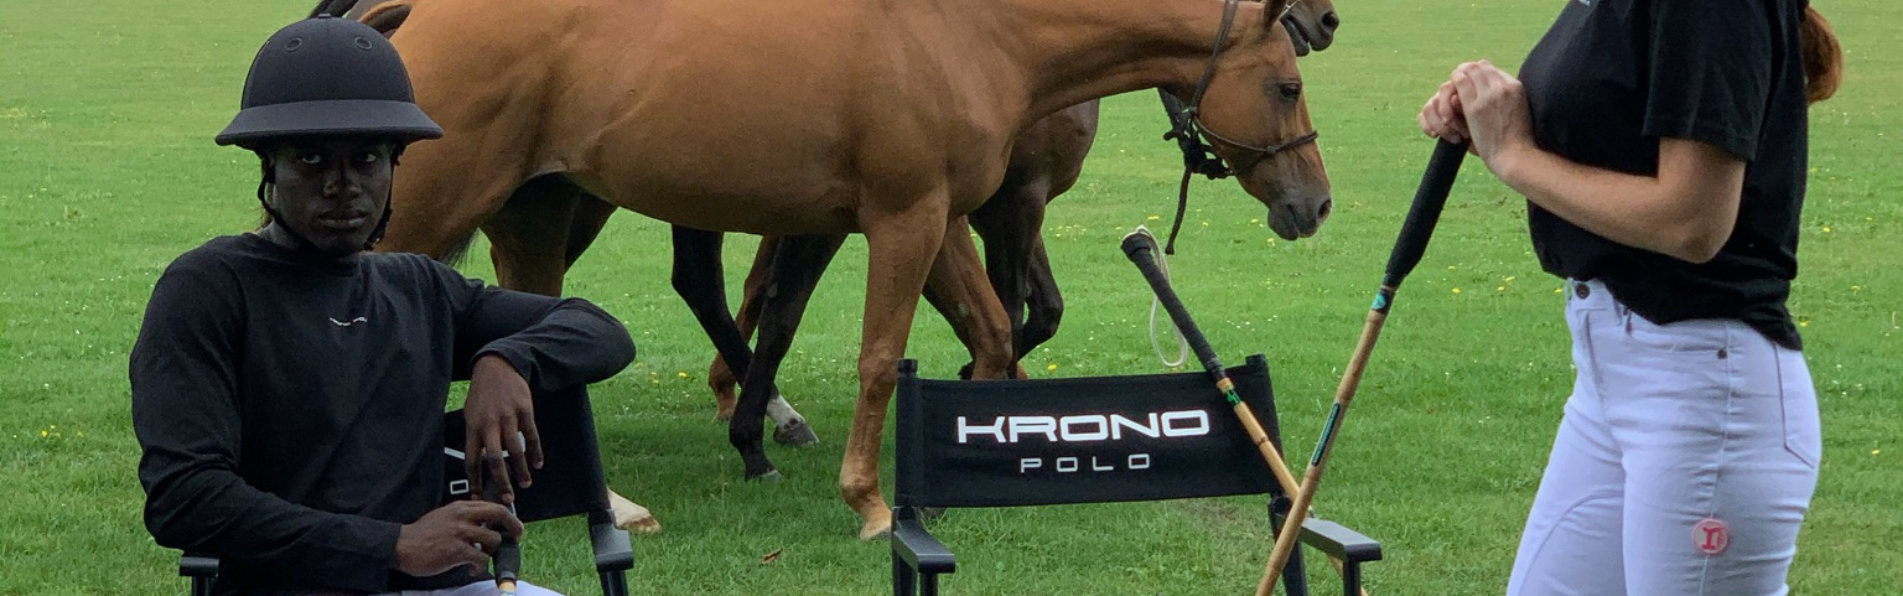 https://www.kronopolo.com/image/cache/catalog/Blog%20Banners/food-for-polo-players-1903x596.png